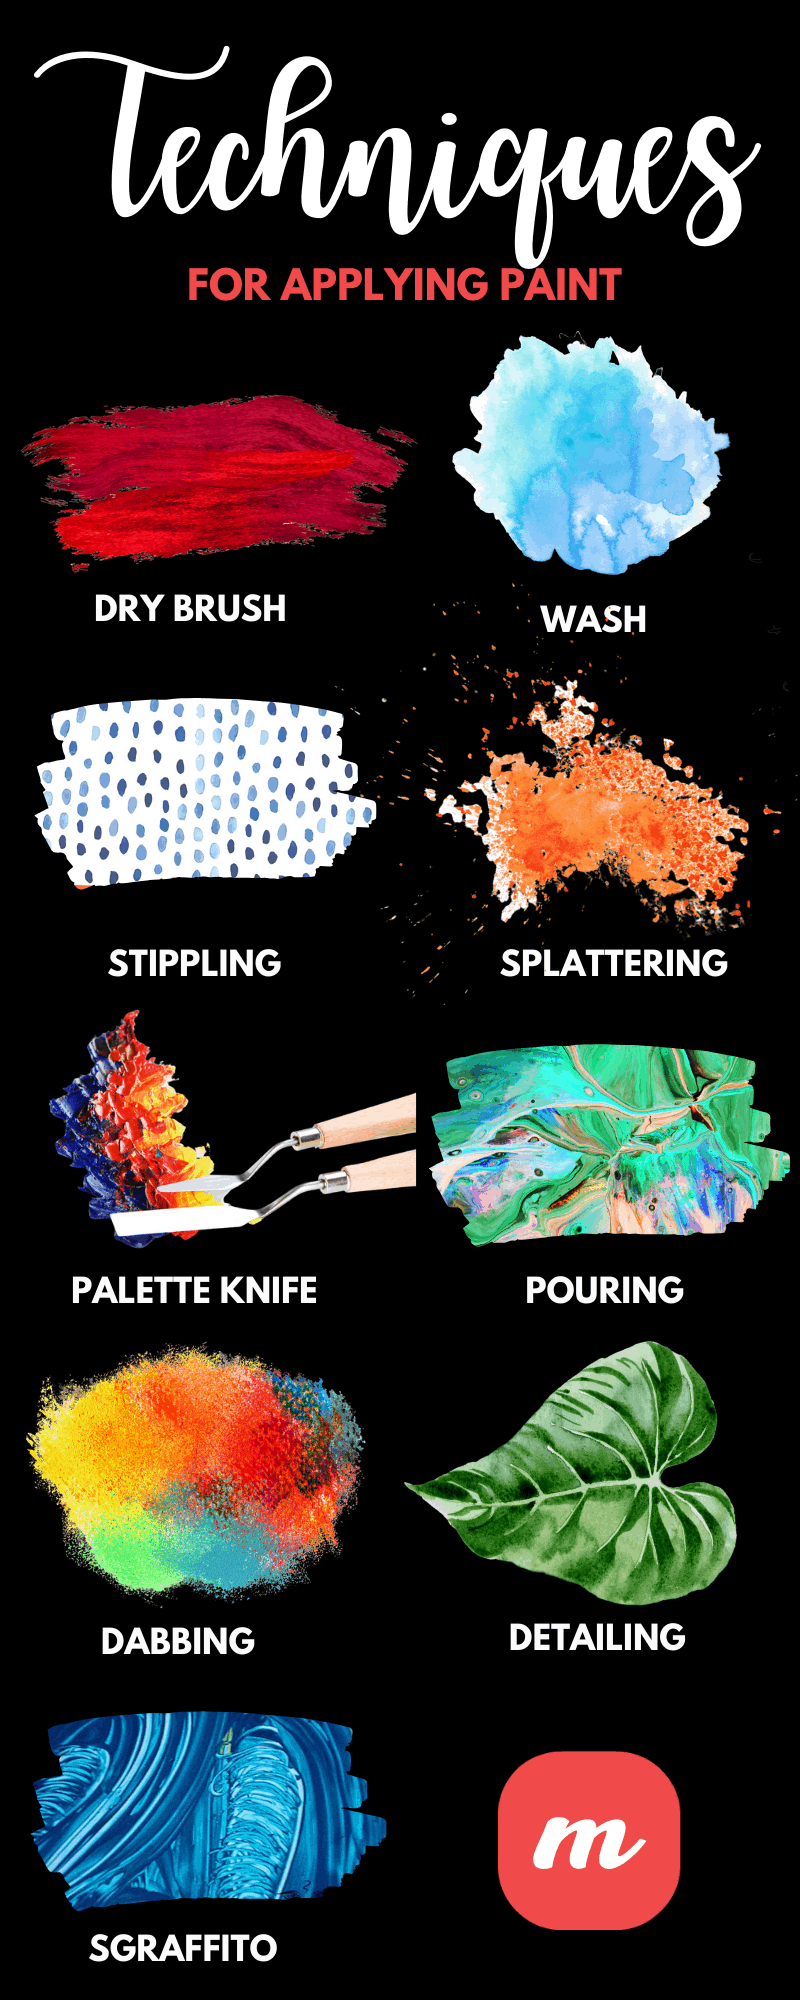 15 Acrylic Painting Techniques All Beginners Should Try - Infographic